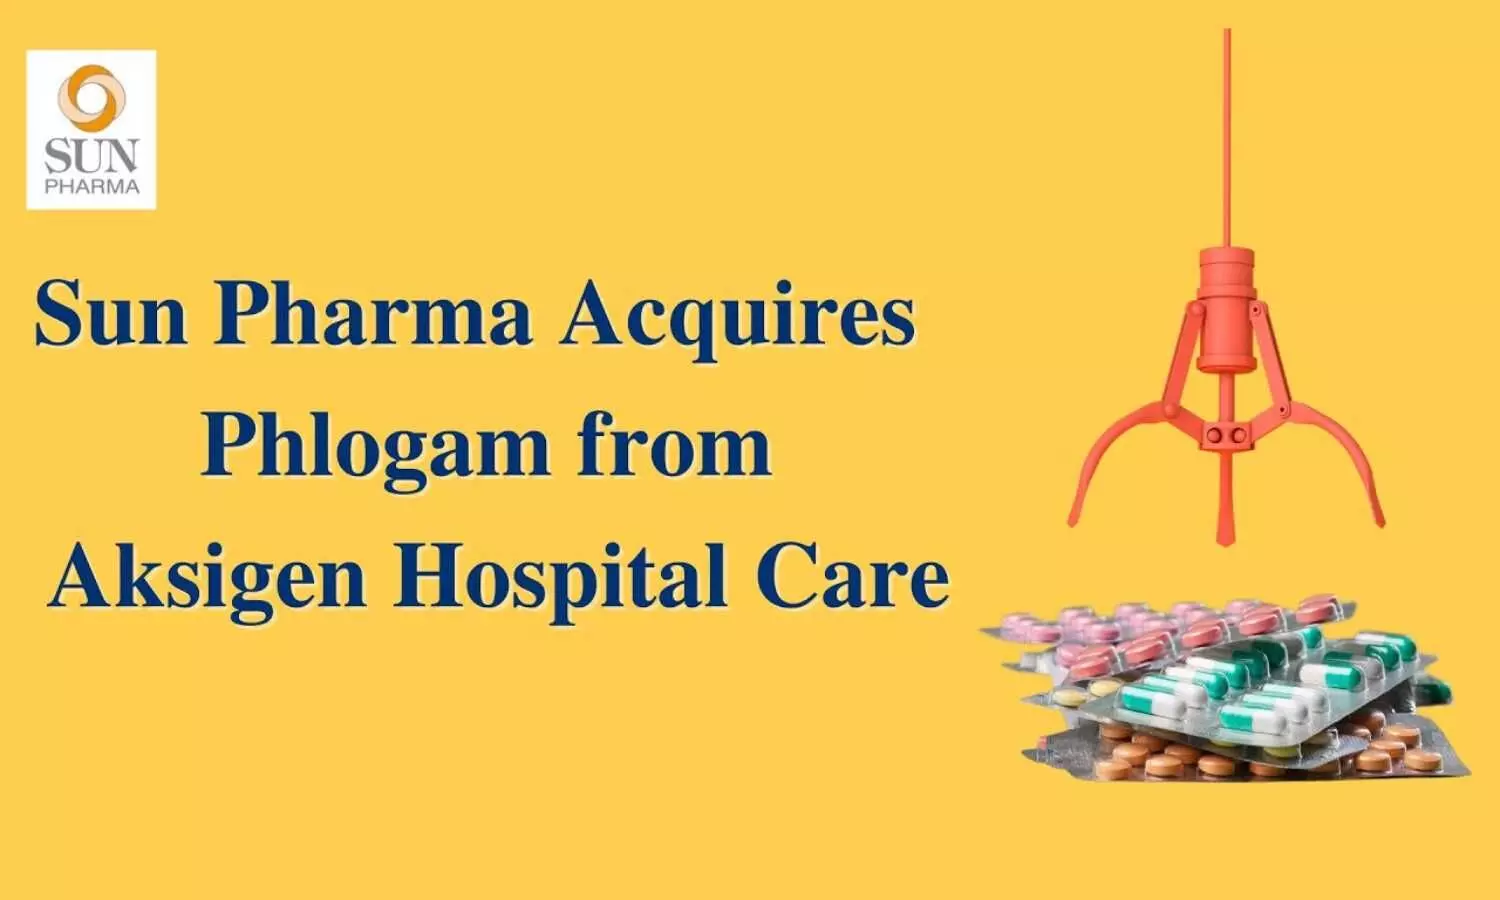 Sun Pharma acquires DCGI approved anti-inflammatory brand Phlogam from Aksigen Hospital Care